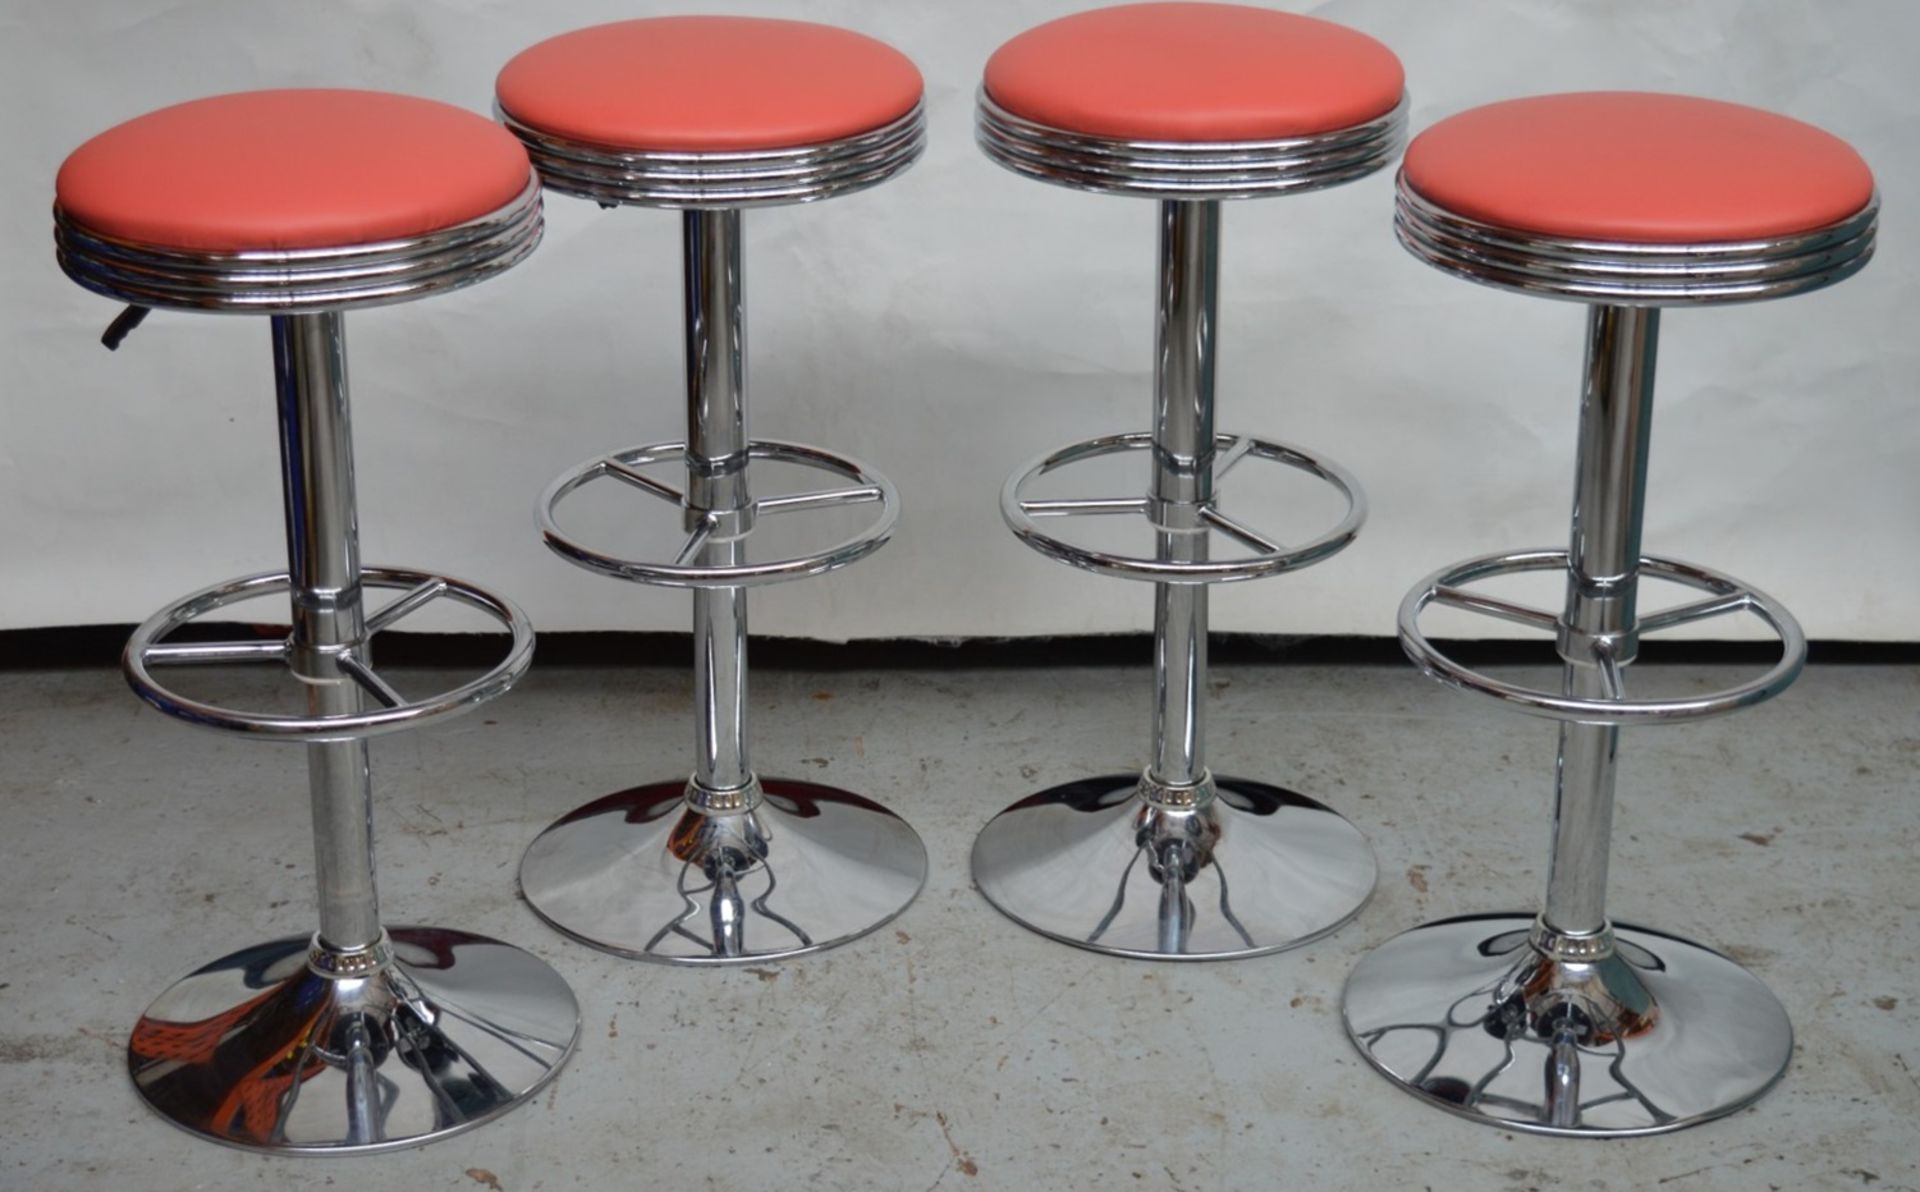 4 x Retro American Roadside Diner Themed Gas Lift Bar Stools - CL164 - Fantastic Stools With Full - Image 2 of 14